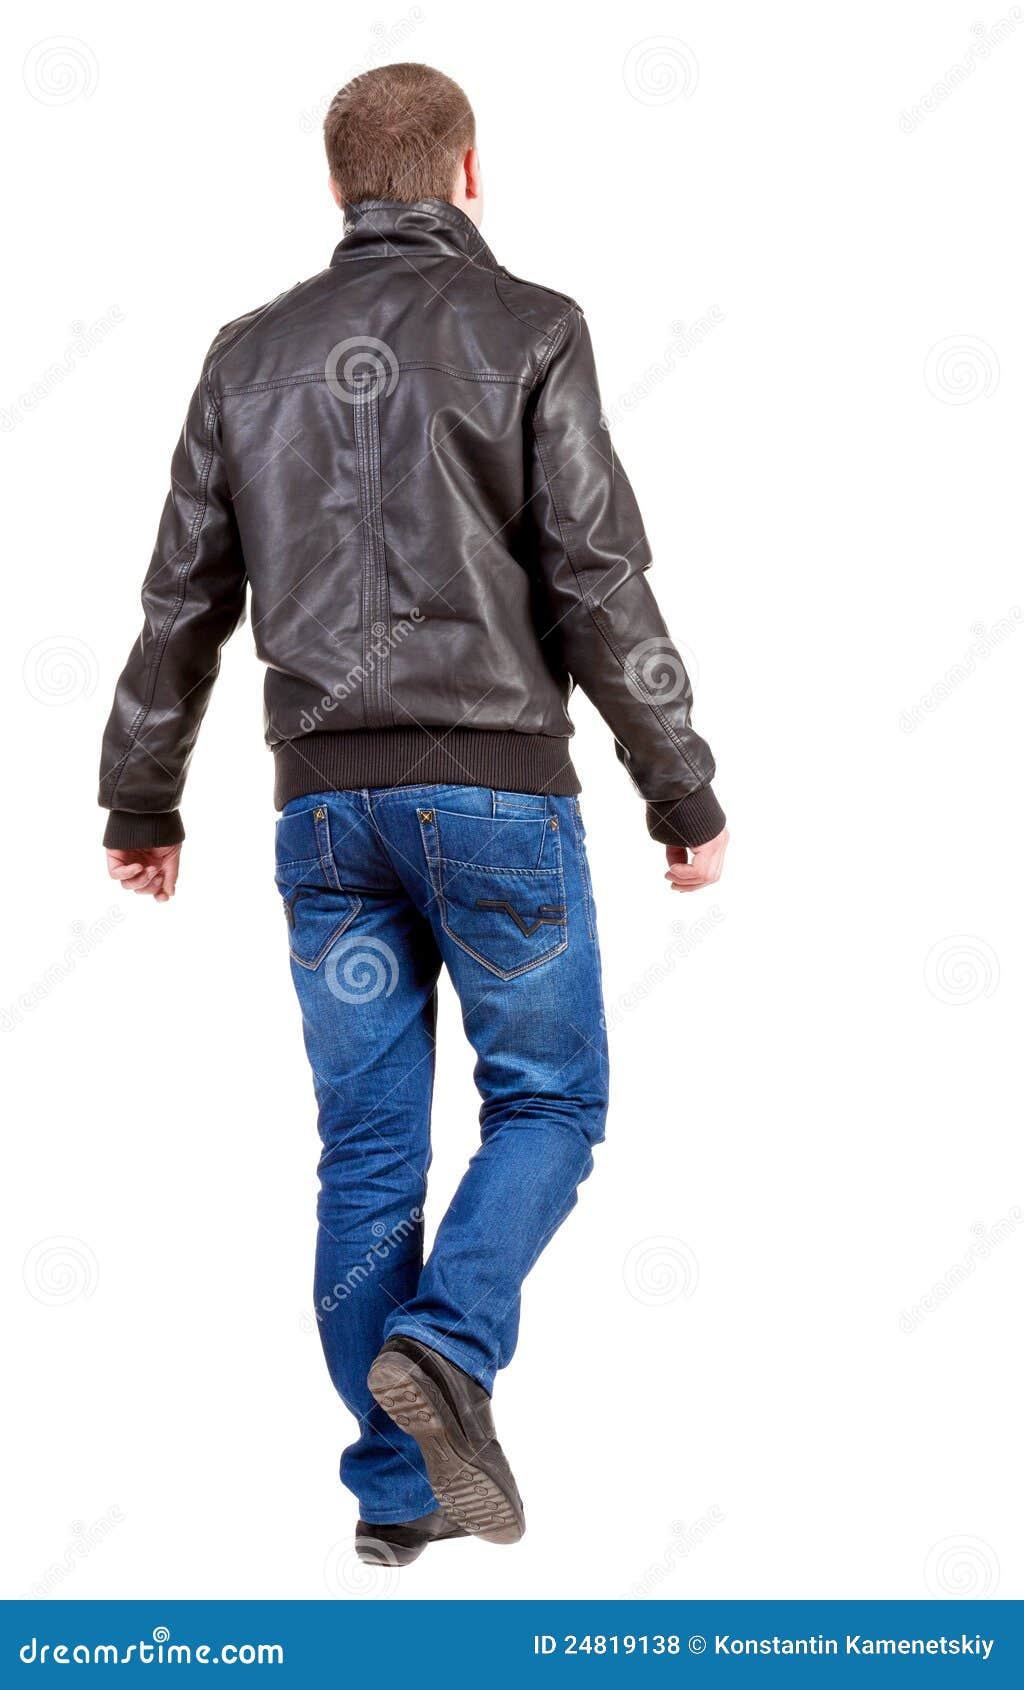 Back View Of Walking Handsome Man In Jacket. Royalty Free Stock Photos